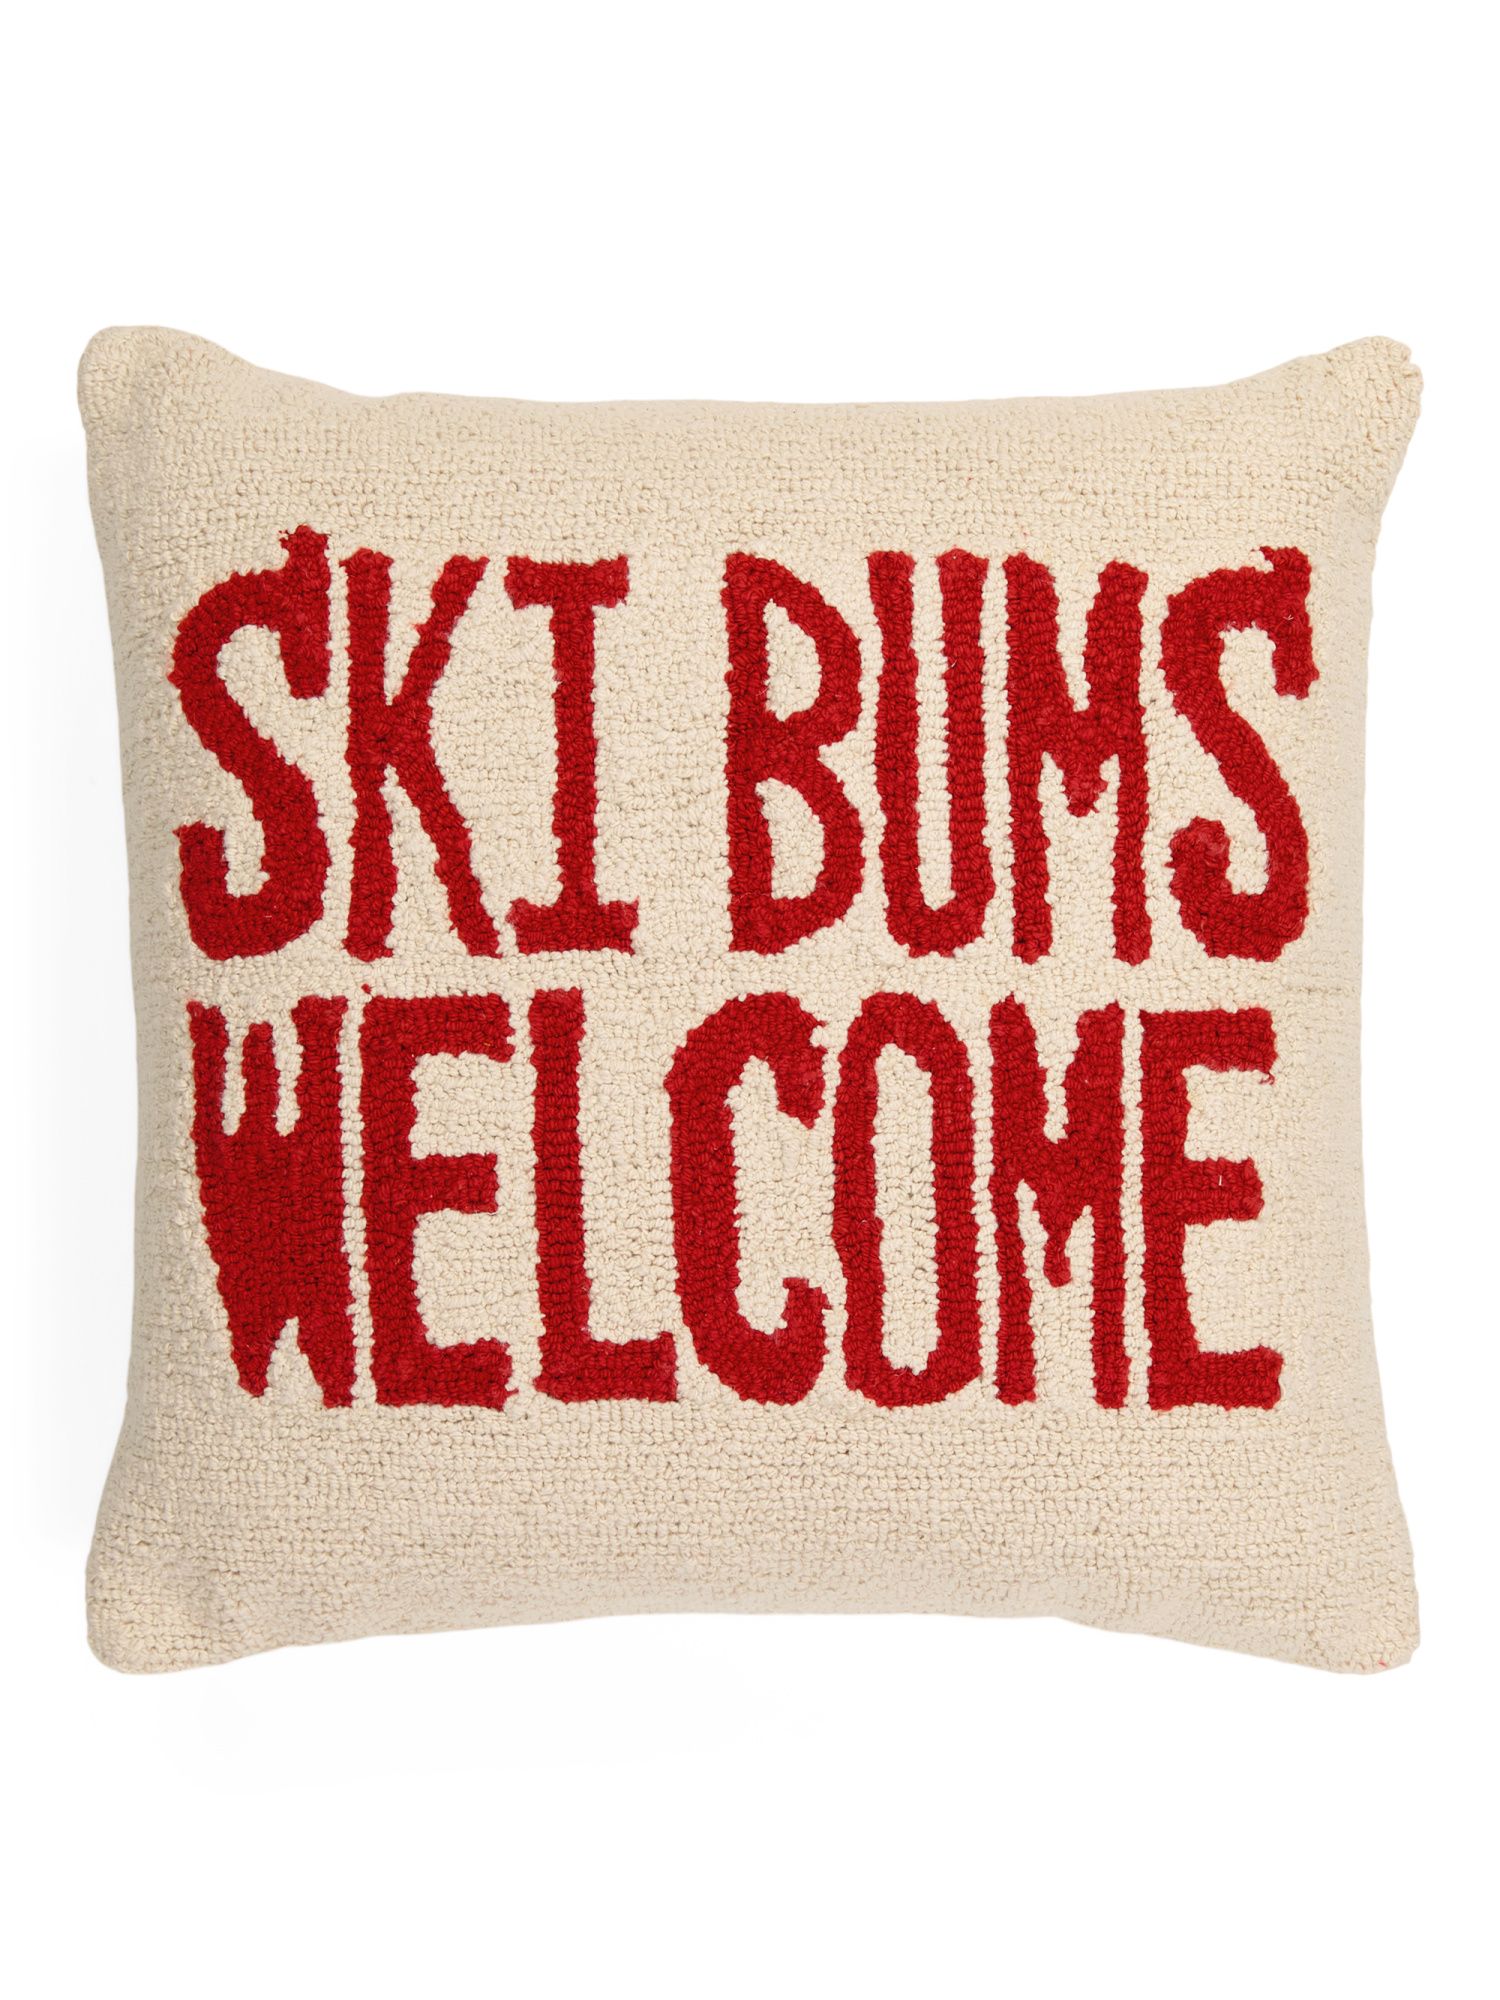 20x20 Hand Hooked Ski Bums Welcome Pillow | TJ Maxx